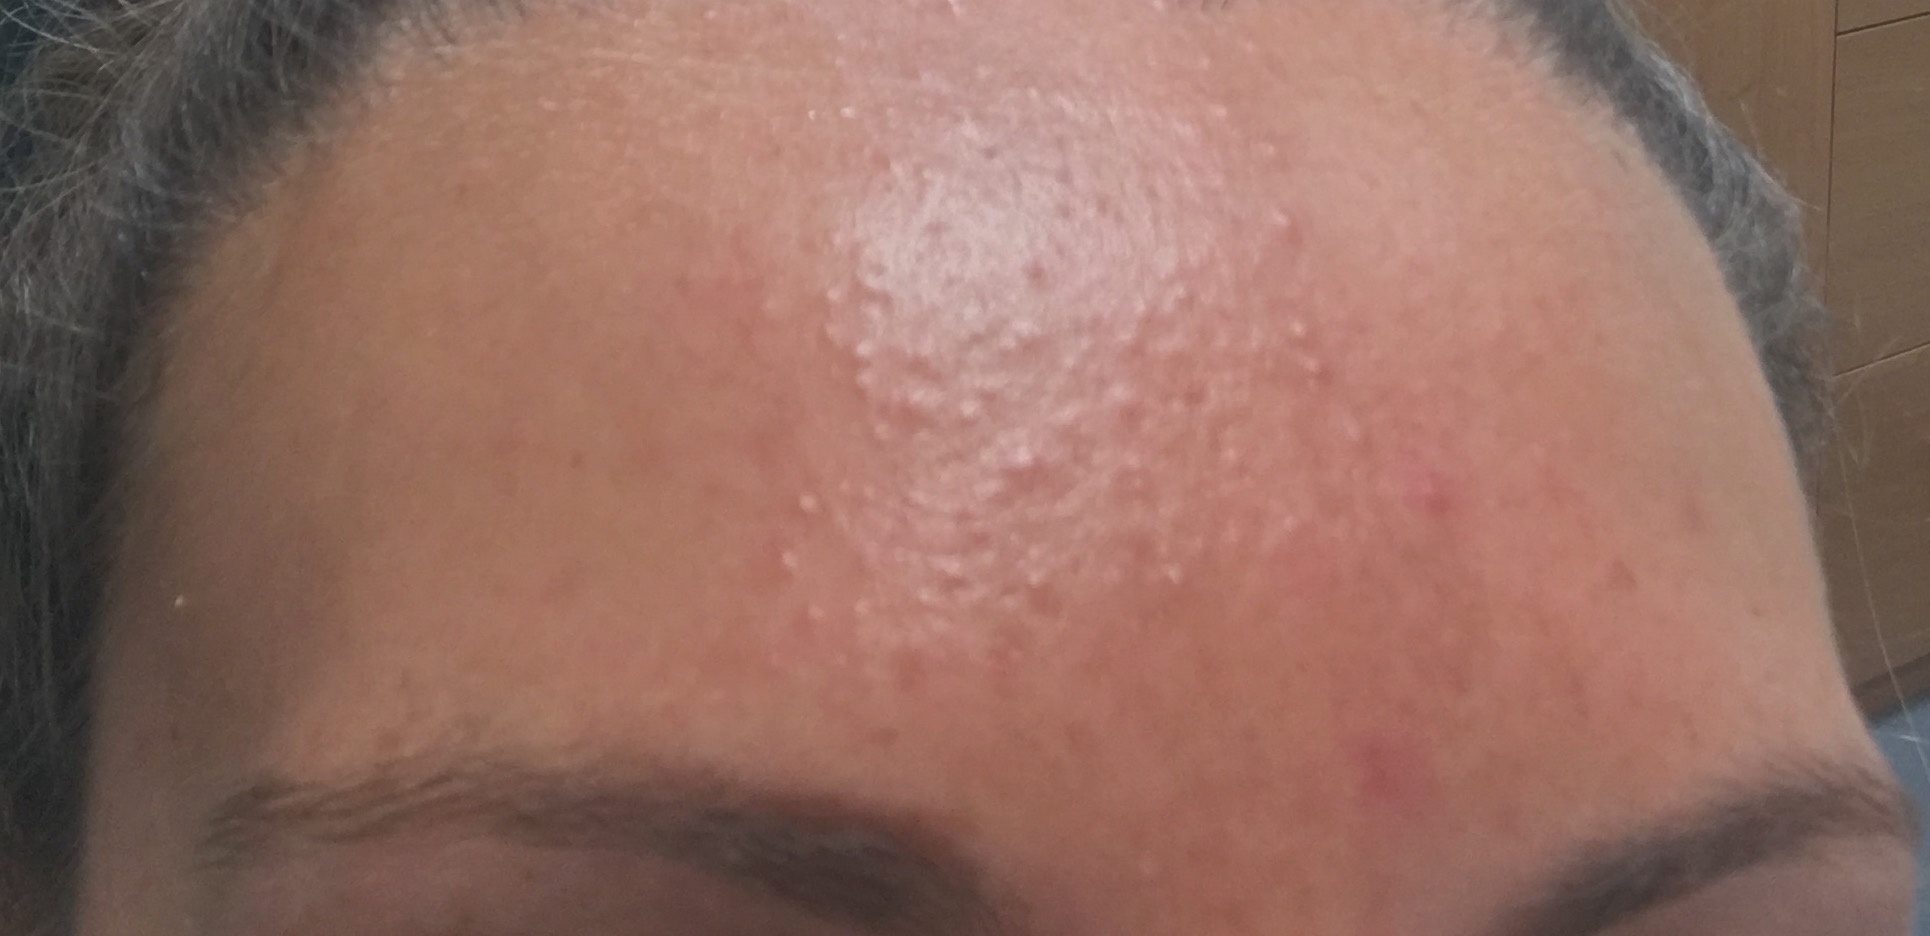 Small Colourless Bumps On My Forehead General Acne Discussion